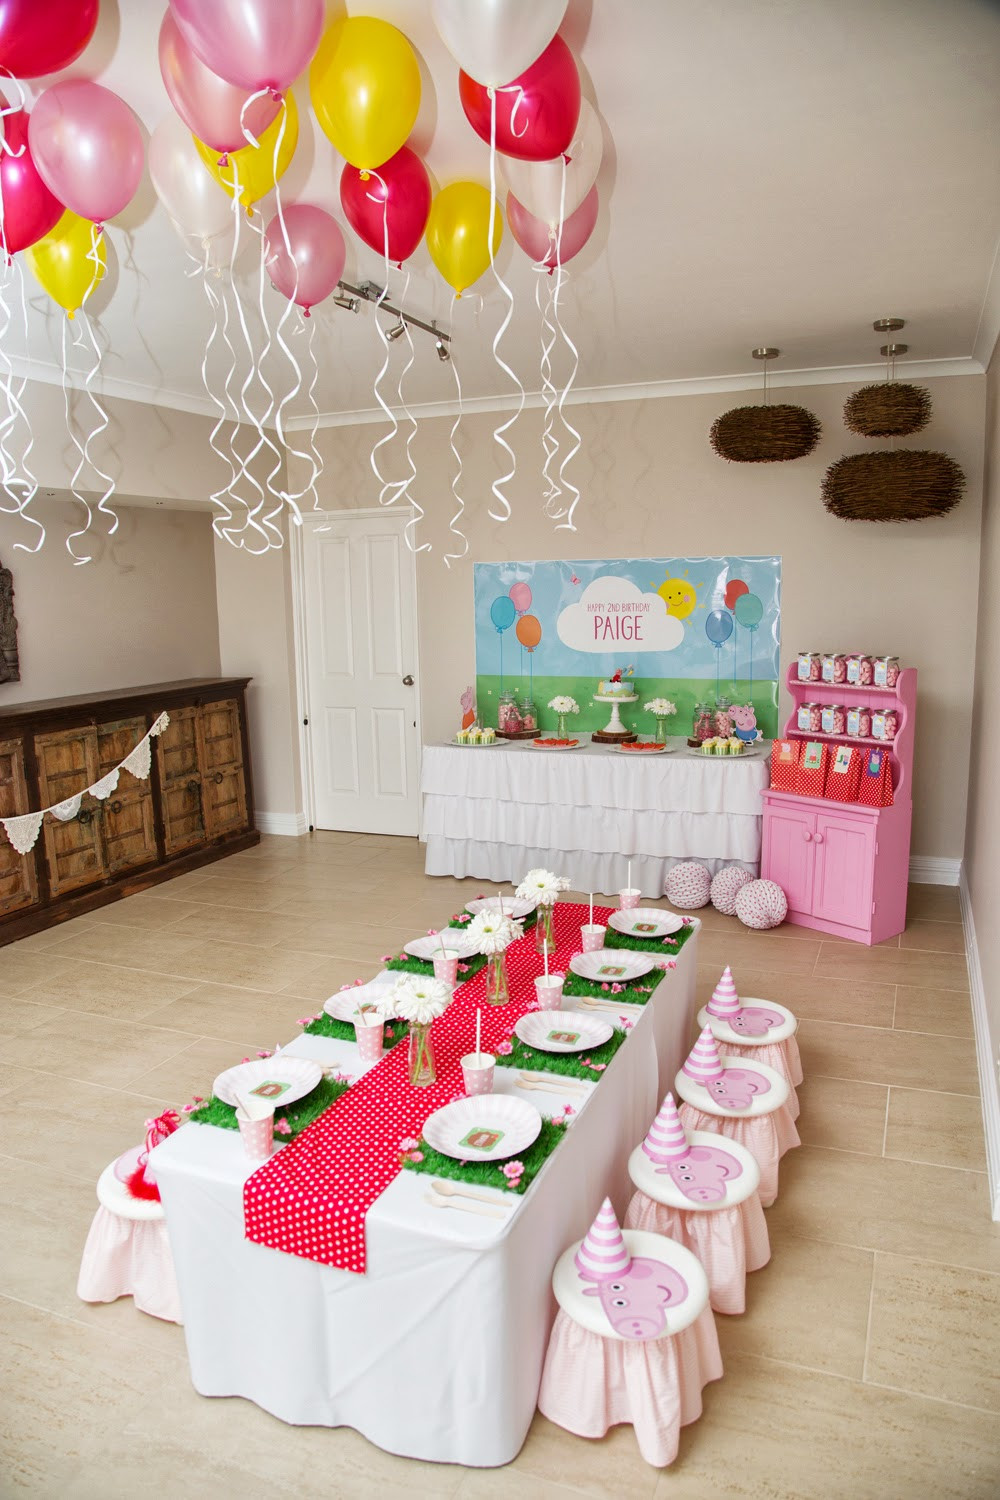 Peppa Pig Birthday Party Decorations
 Piece of Cake Paige s 2nd Birthday Peppa Pig Theme